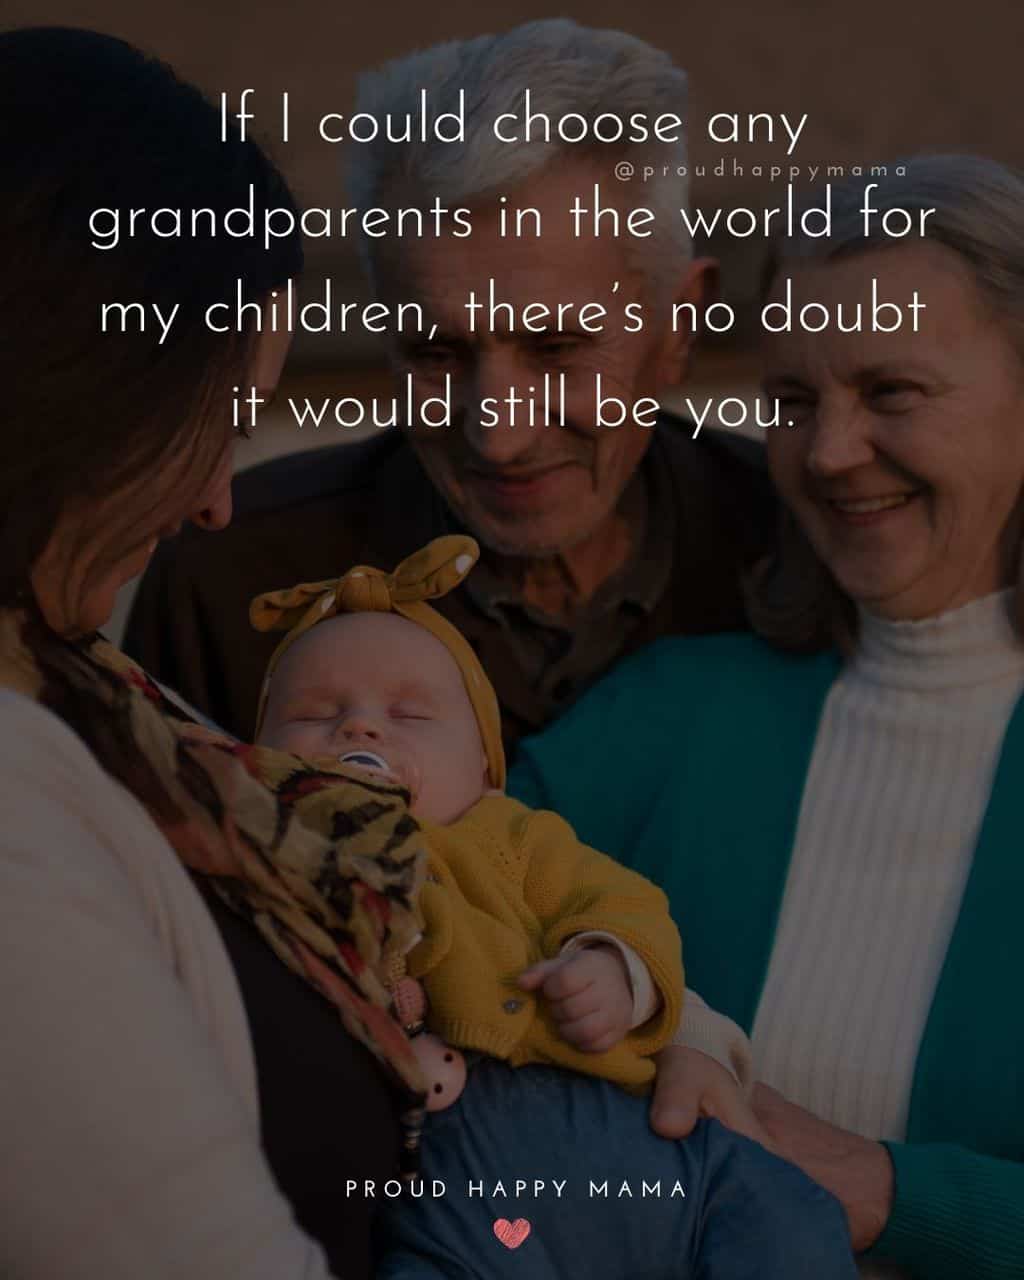 Grandparent Quotes – If I could choose any grandparents in the world for my children, there’s no doubt it would still be you.’